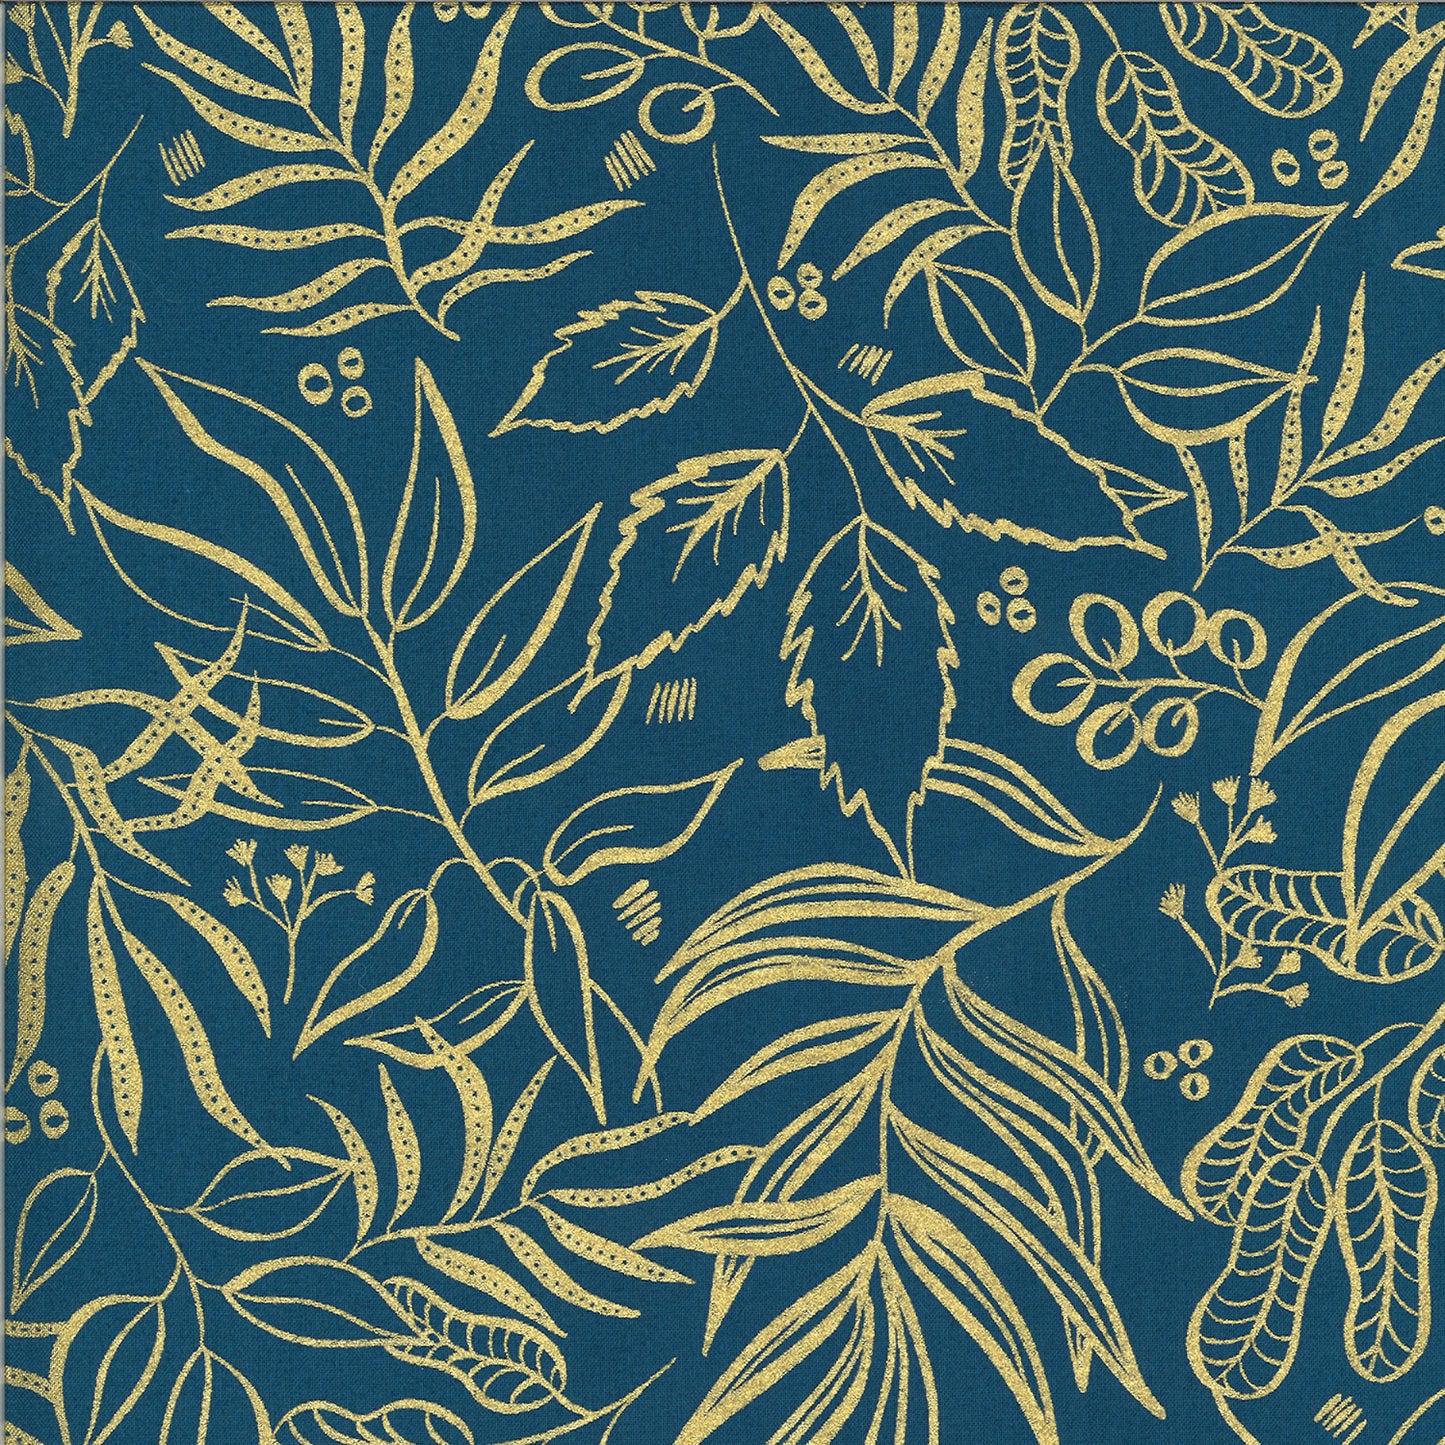 Blooms Metallic Gold Outline on Teal - Weave & Woven